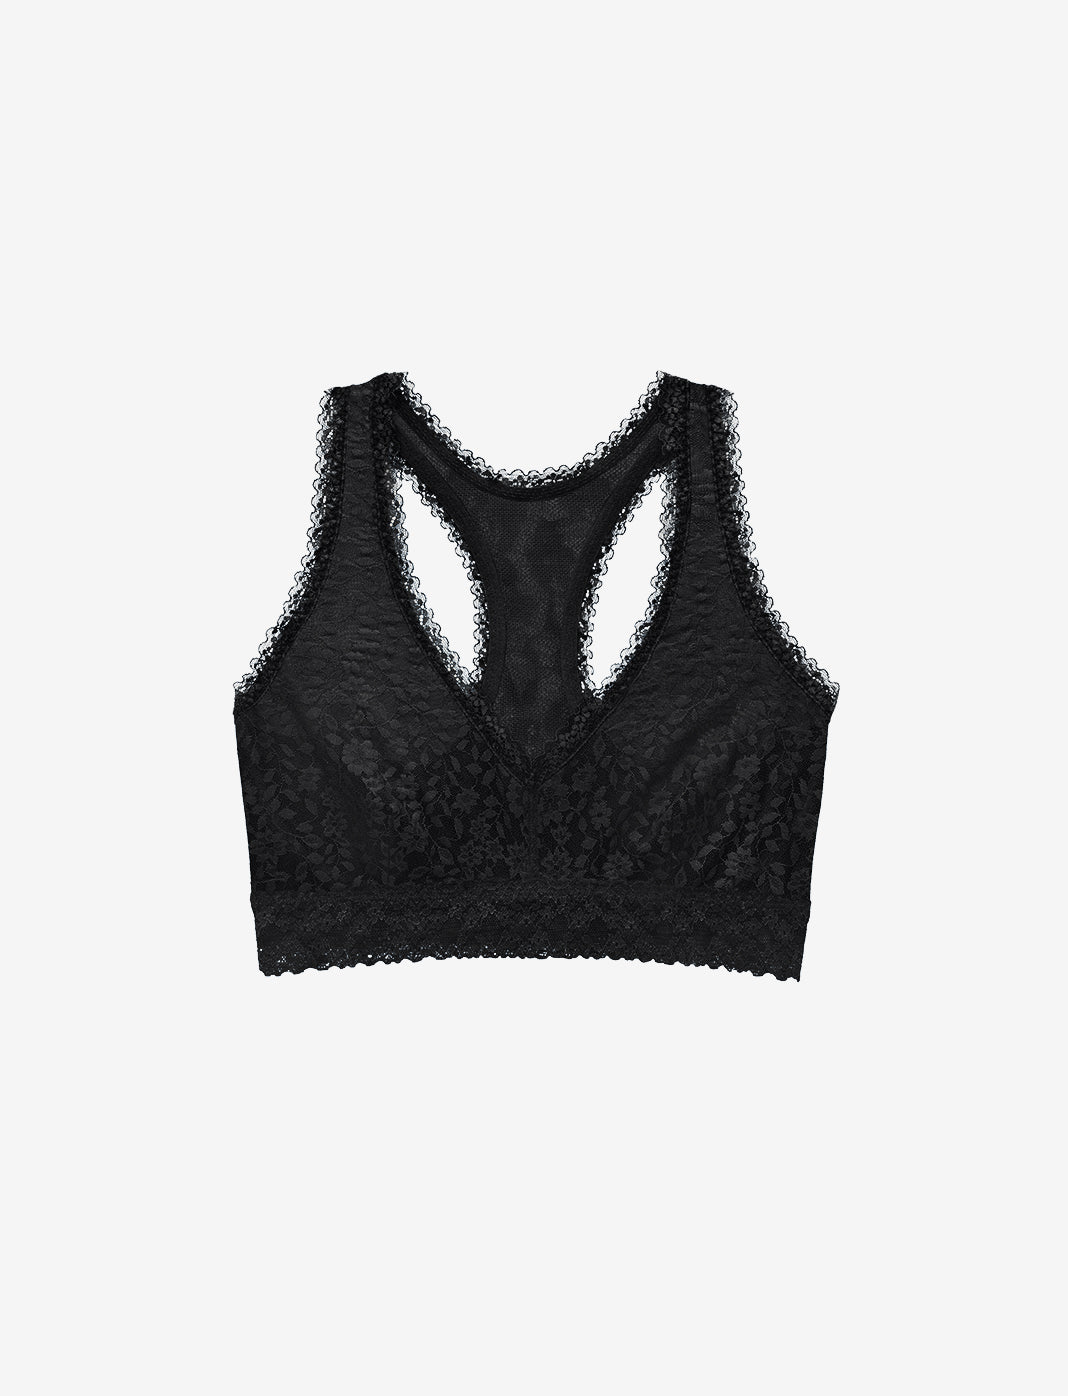 Only Hearts So Fine with Lace Racerback Bralette Black MD at